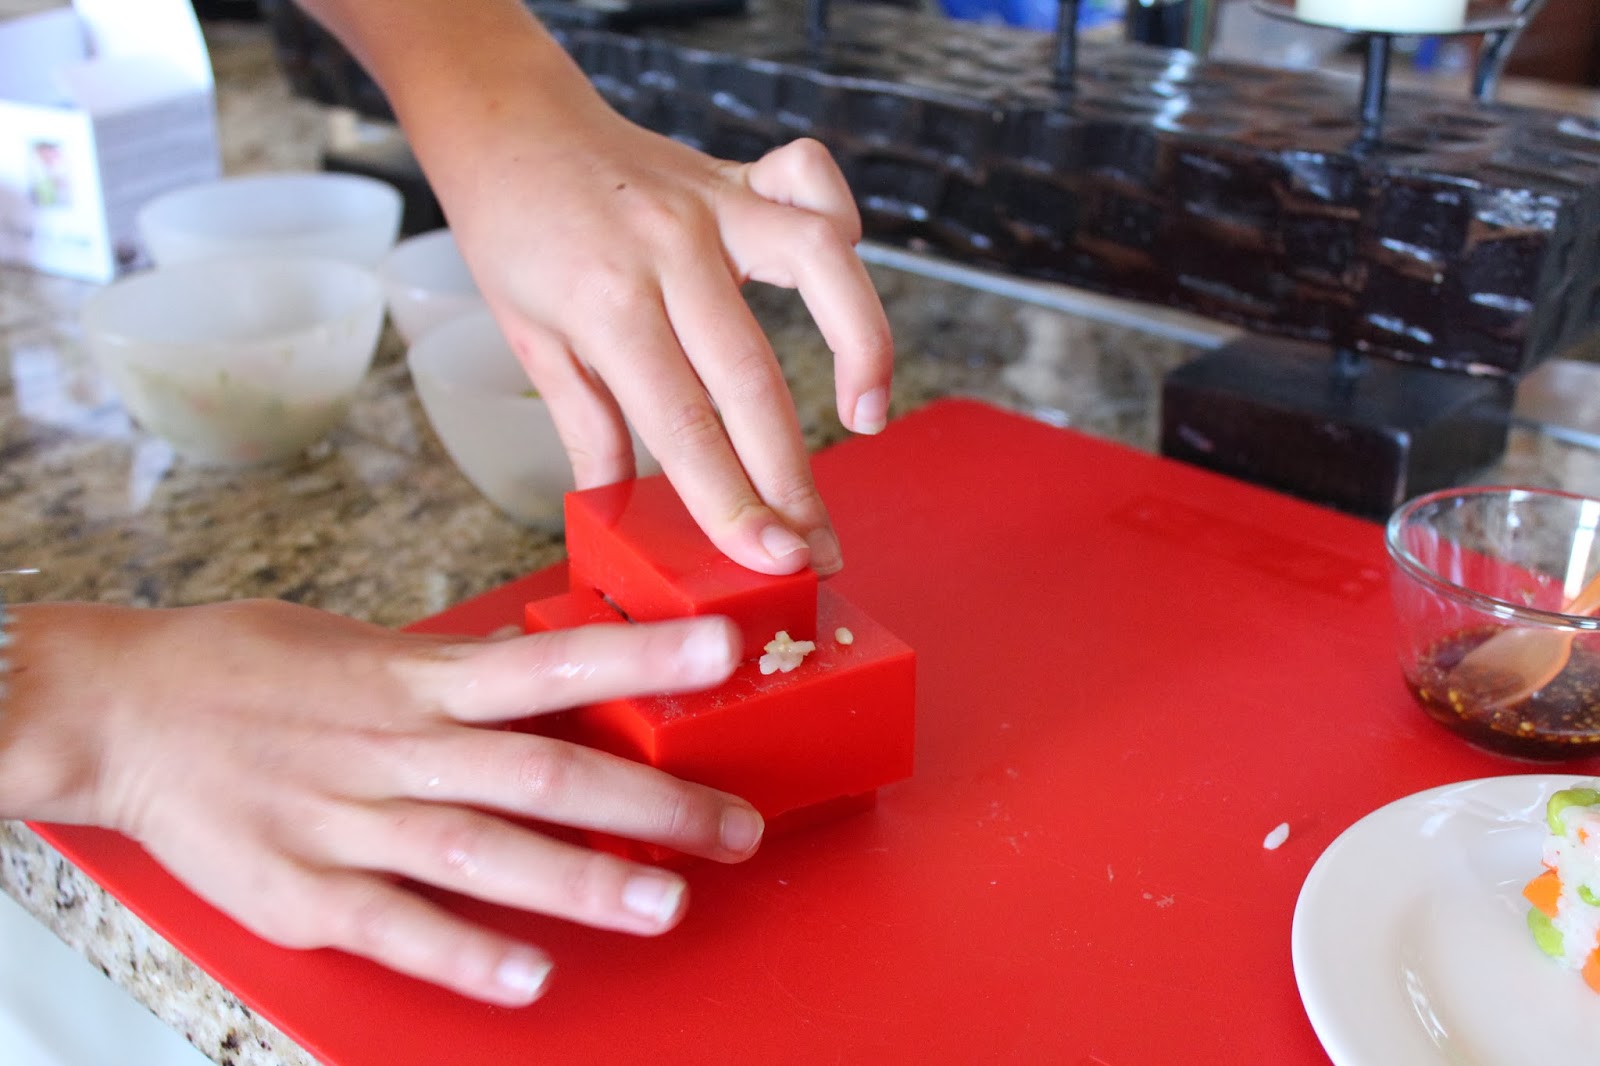 Sushi Rice Cube Maker In Action